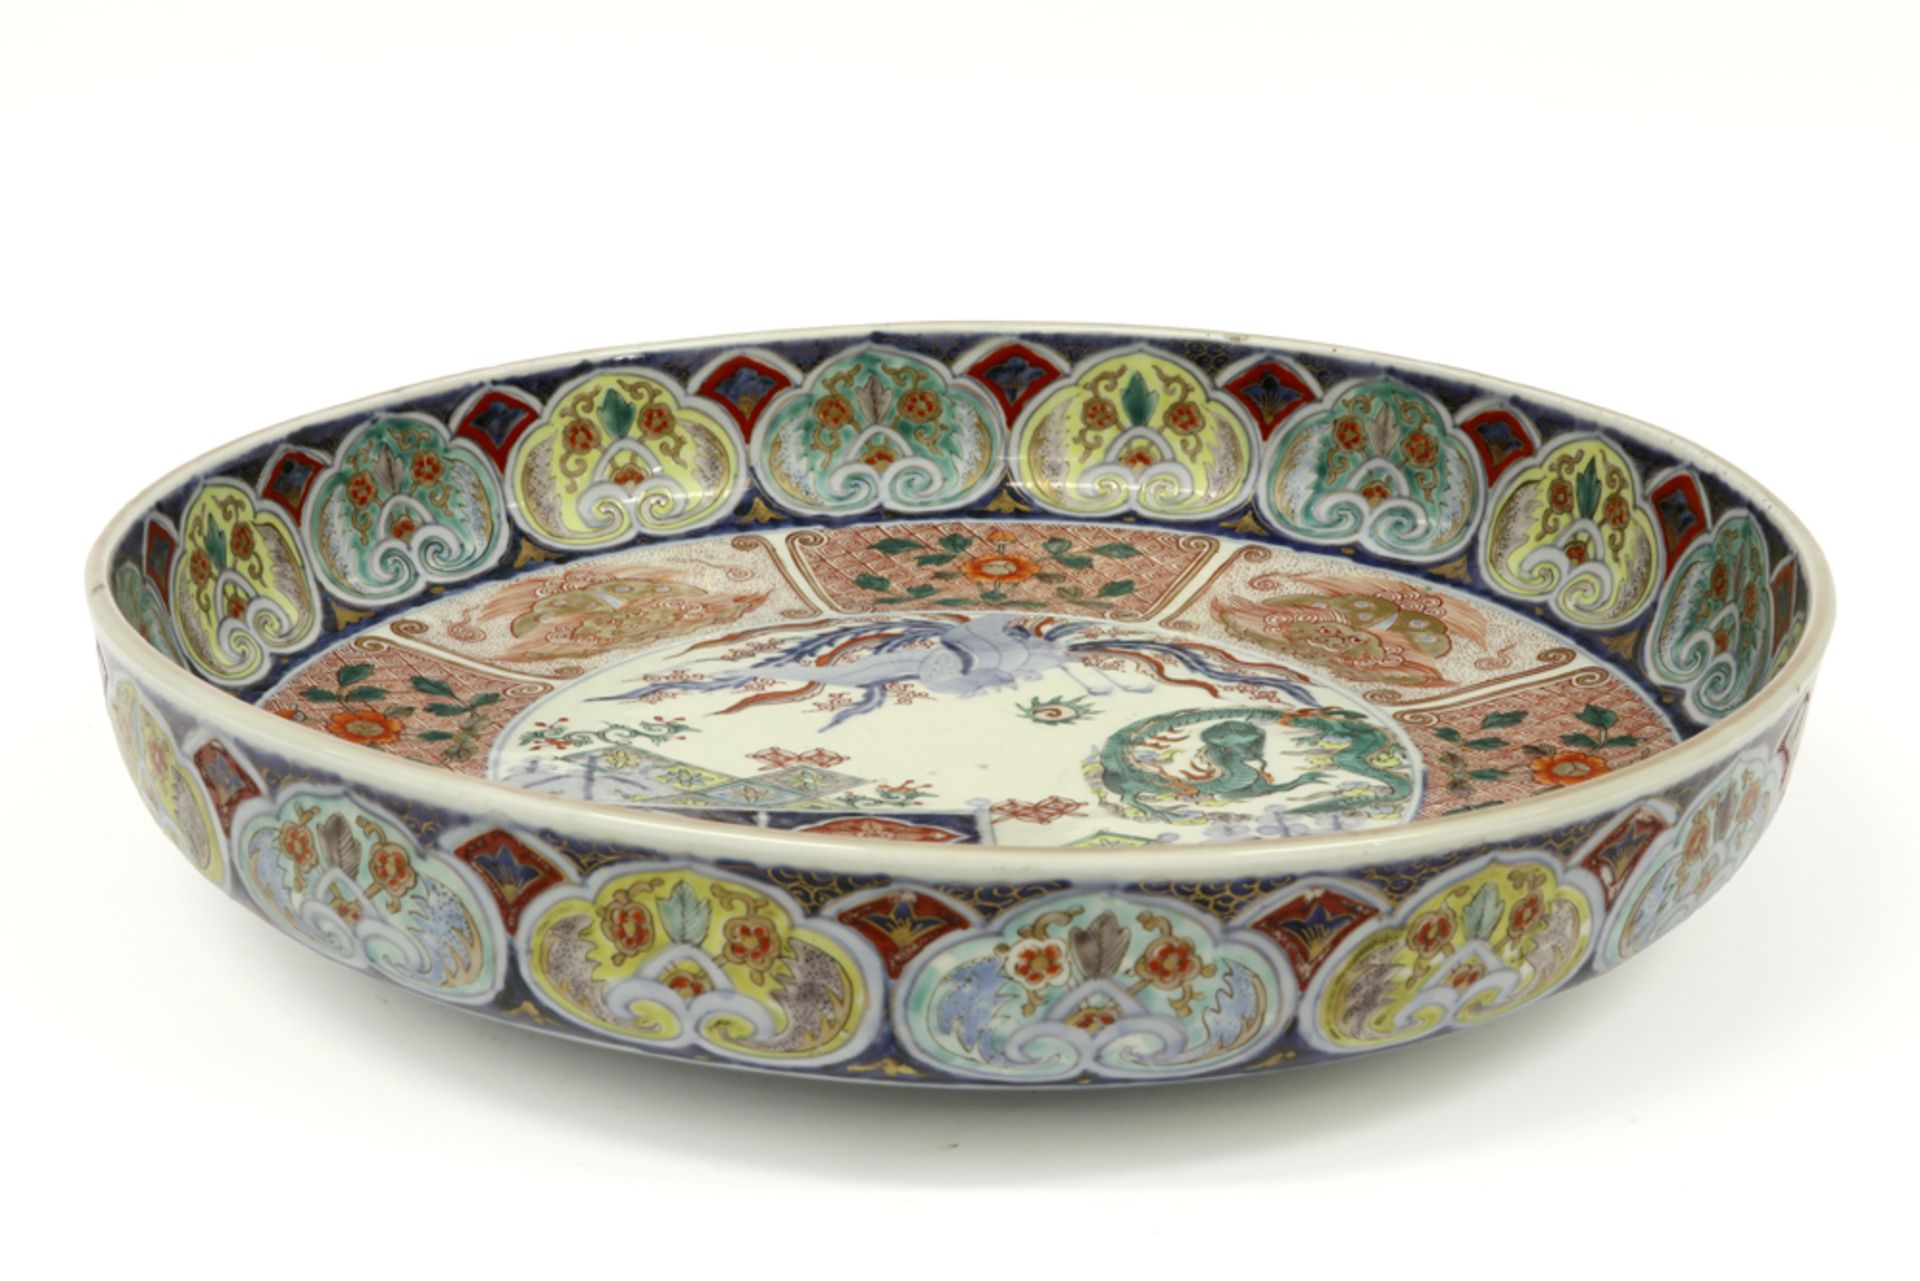 quite large 18th Cent. Japanese bassin in porcelain with a rich Imari decor with phoenix and - Image 2 of 3